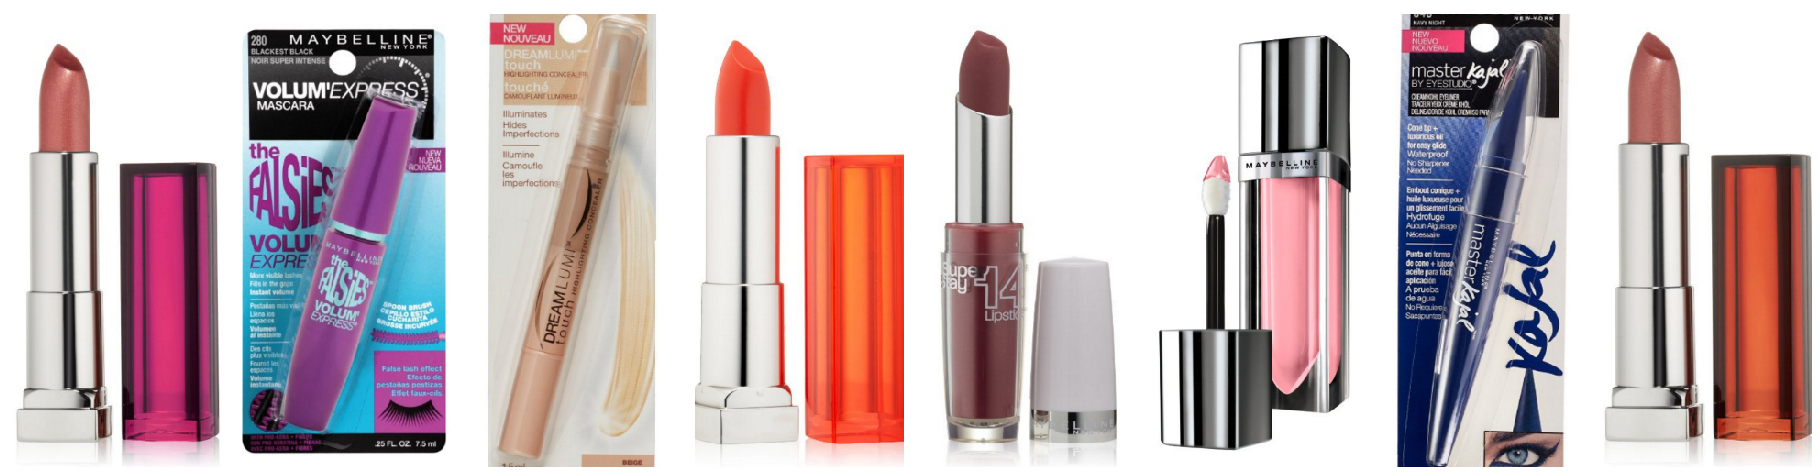 *HOT* NEW Maybelline Coupons = Up to 45% Off Cosmetics!